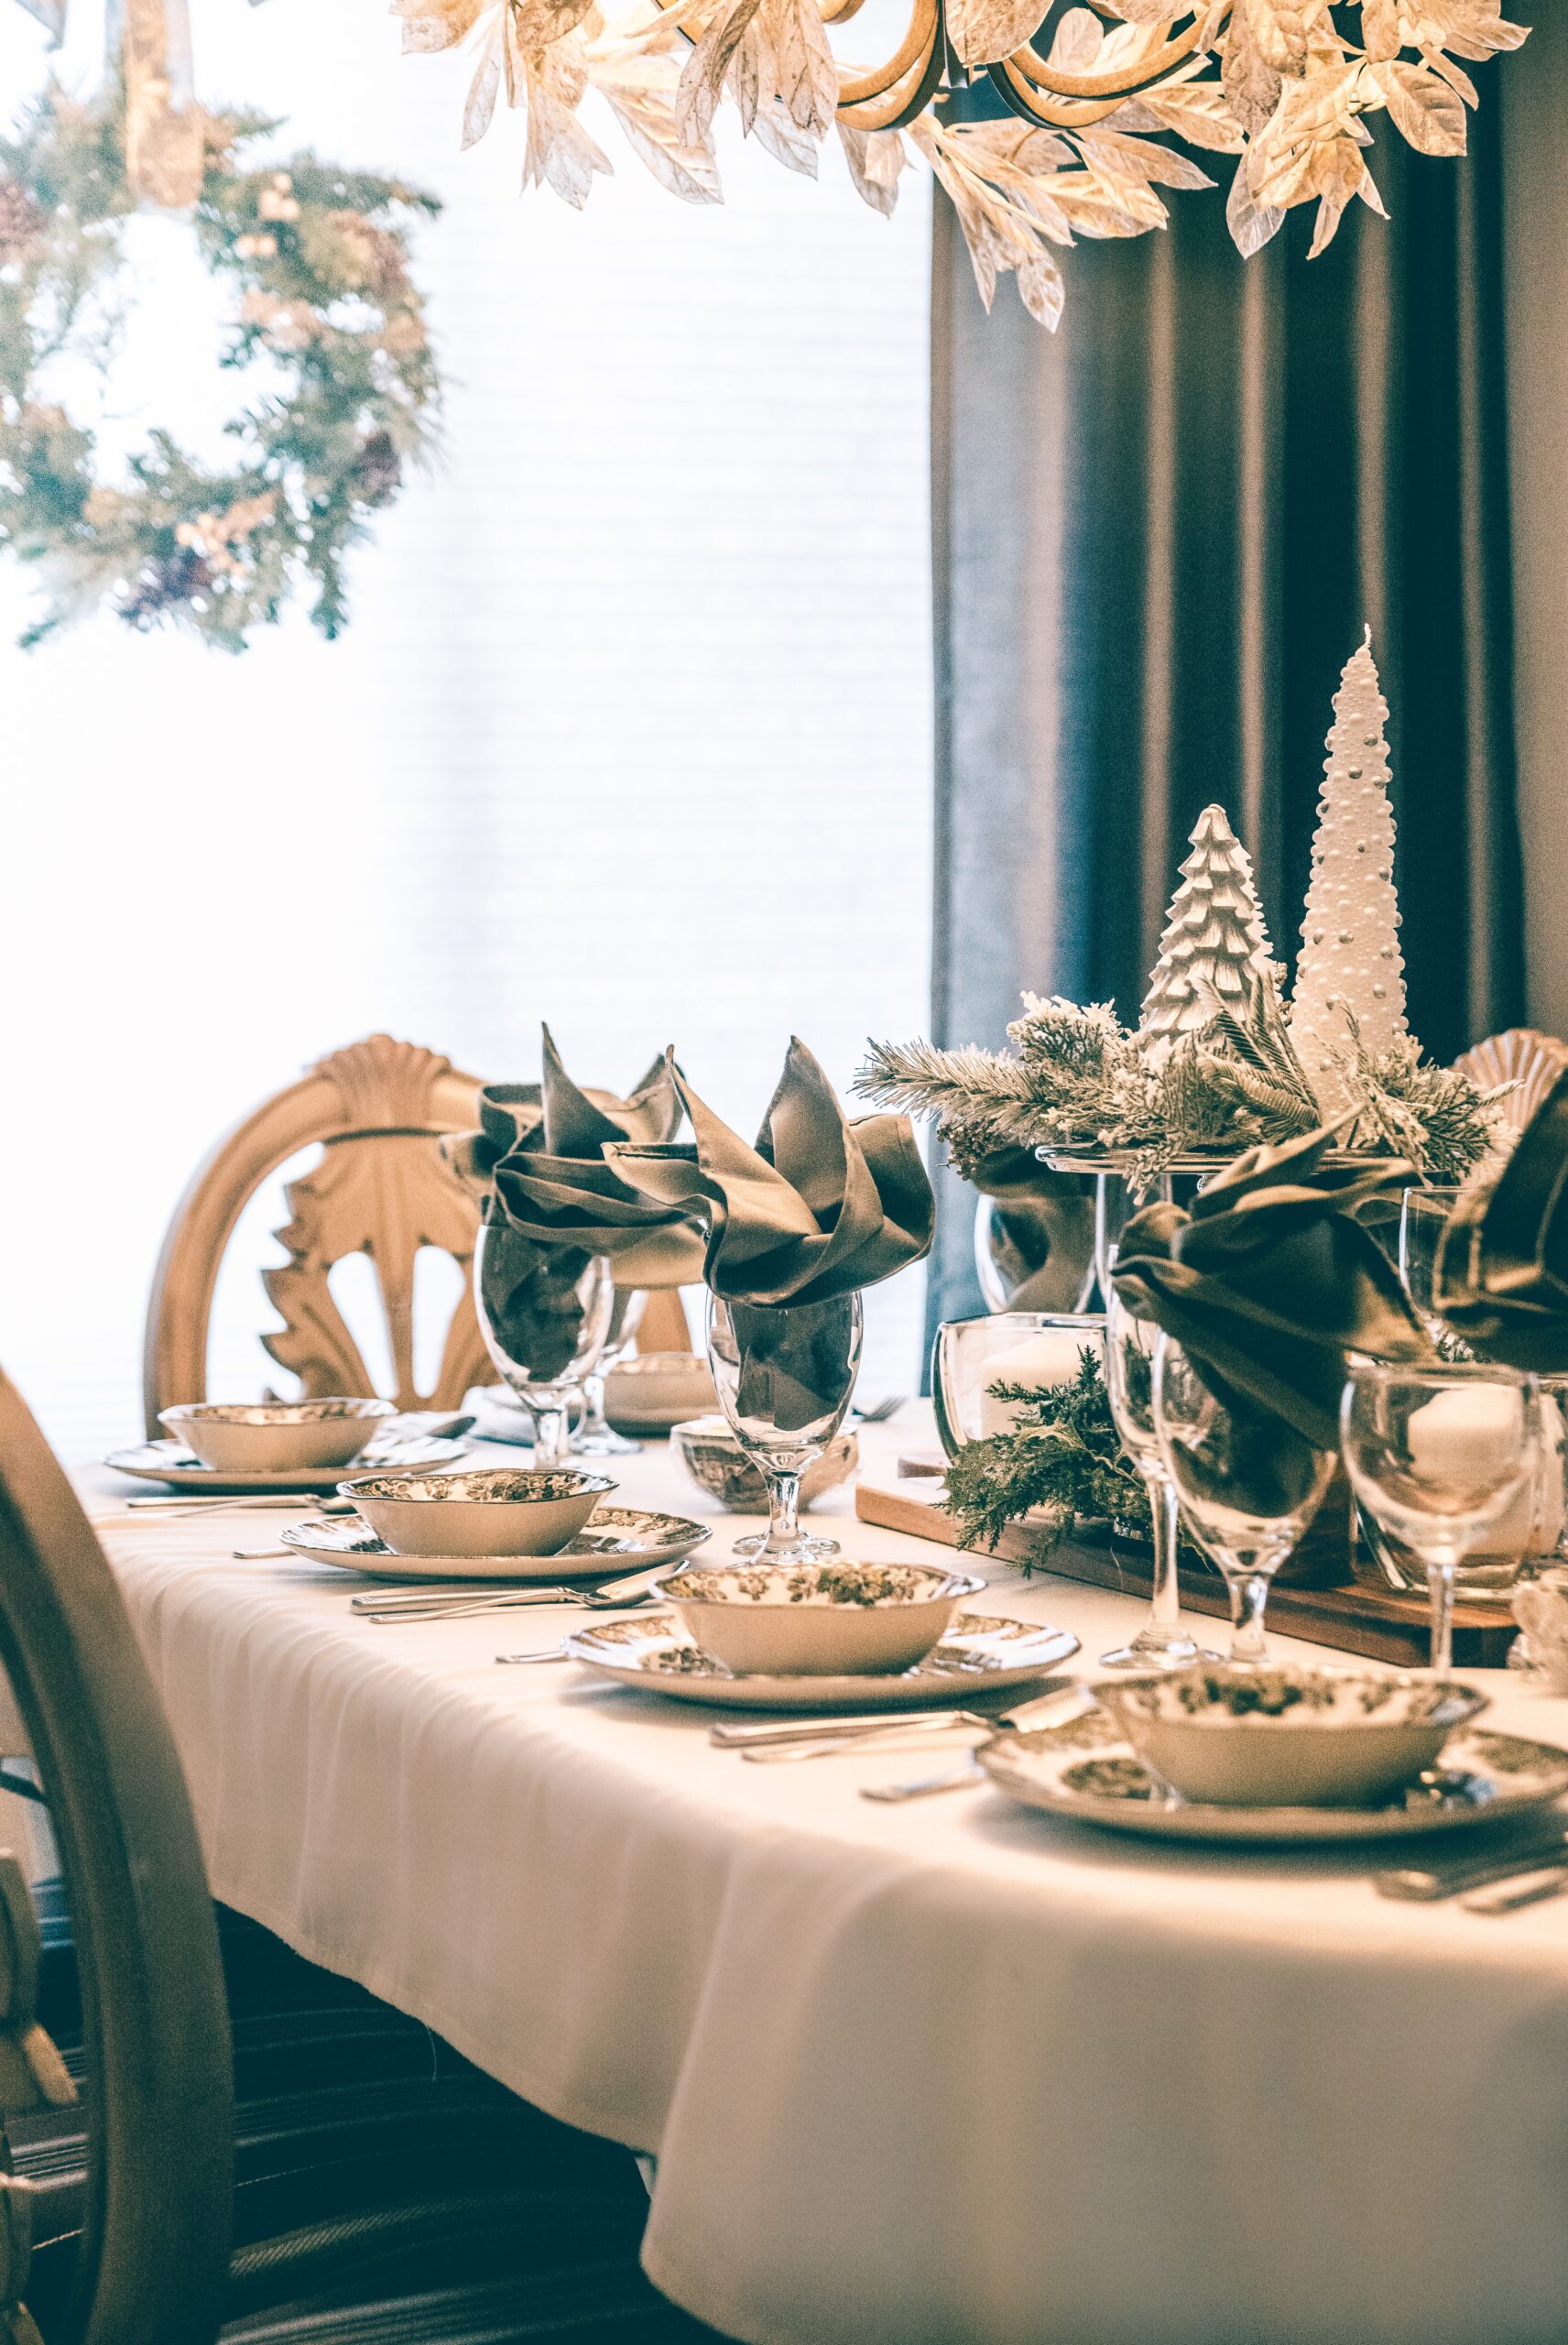 Make Your Guests Feel Welcome This Holiday Season